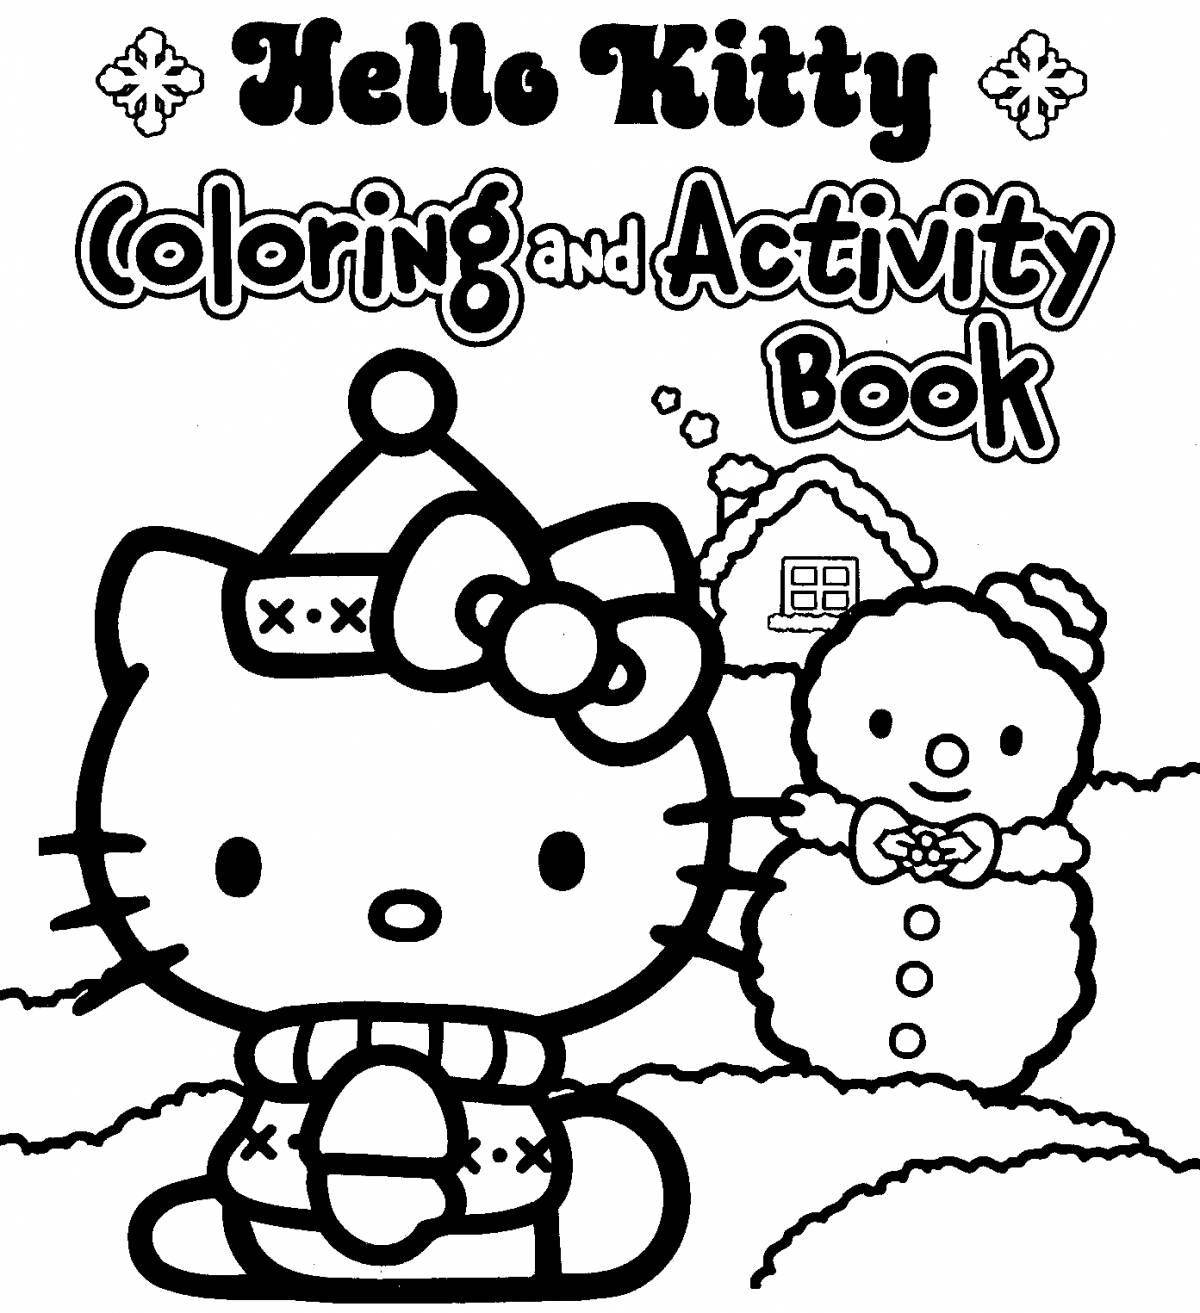 Awesome hello kitty punk coloring book